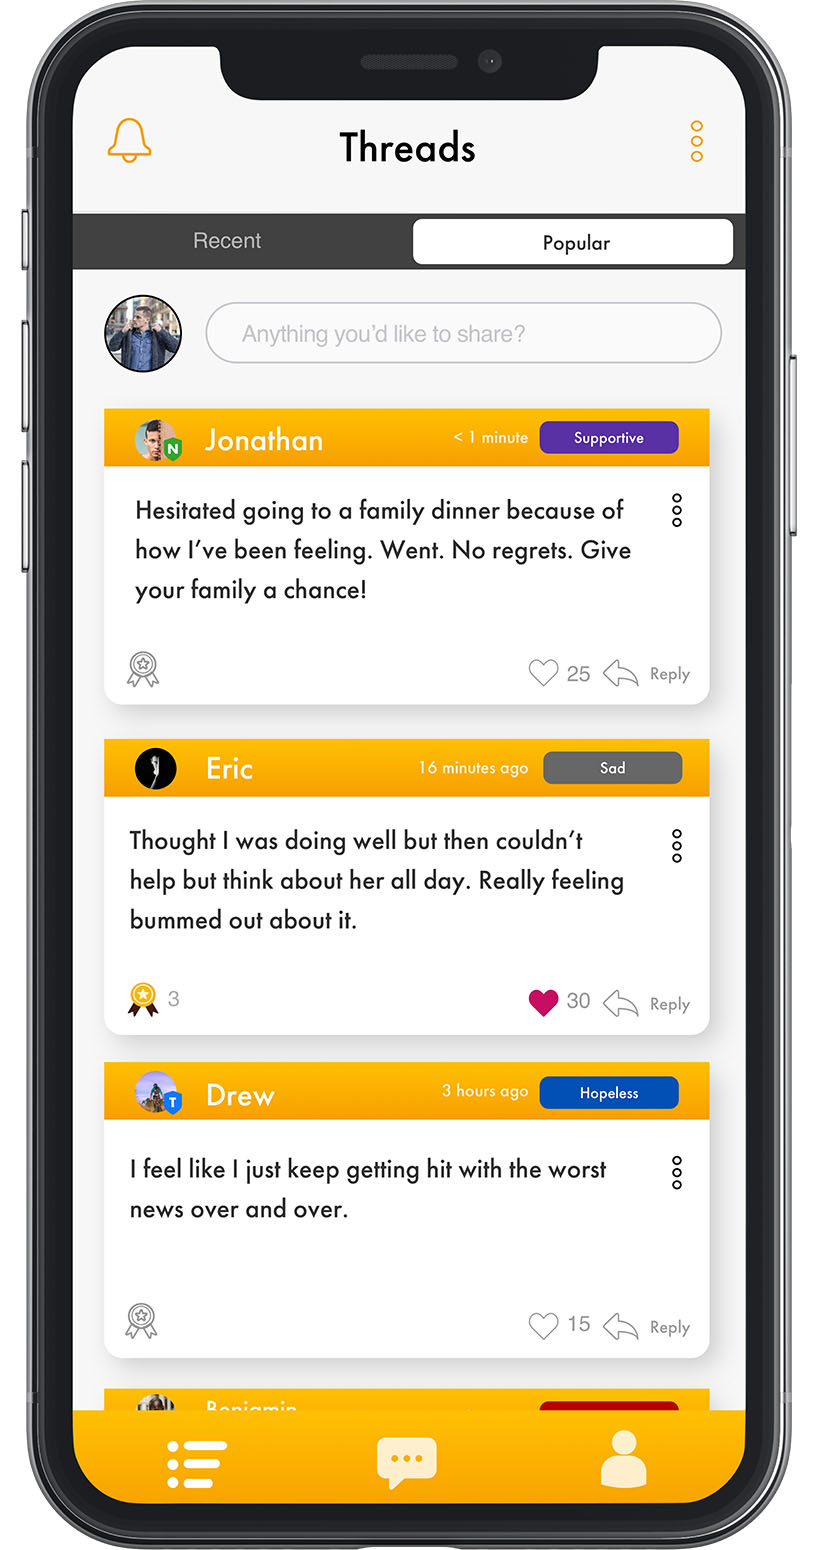 A screenshot of the tethr app with different threads for conversation